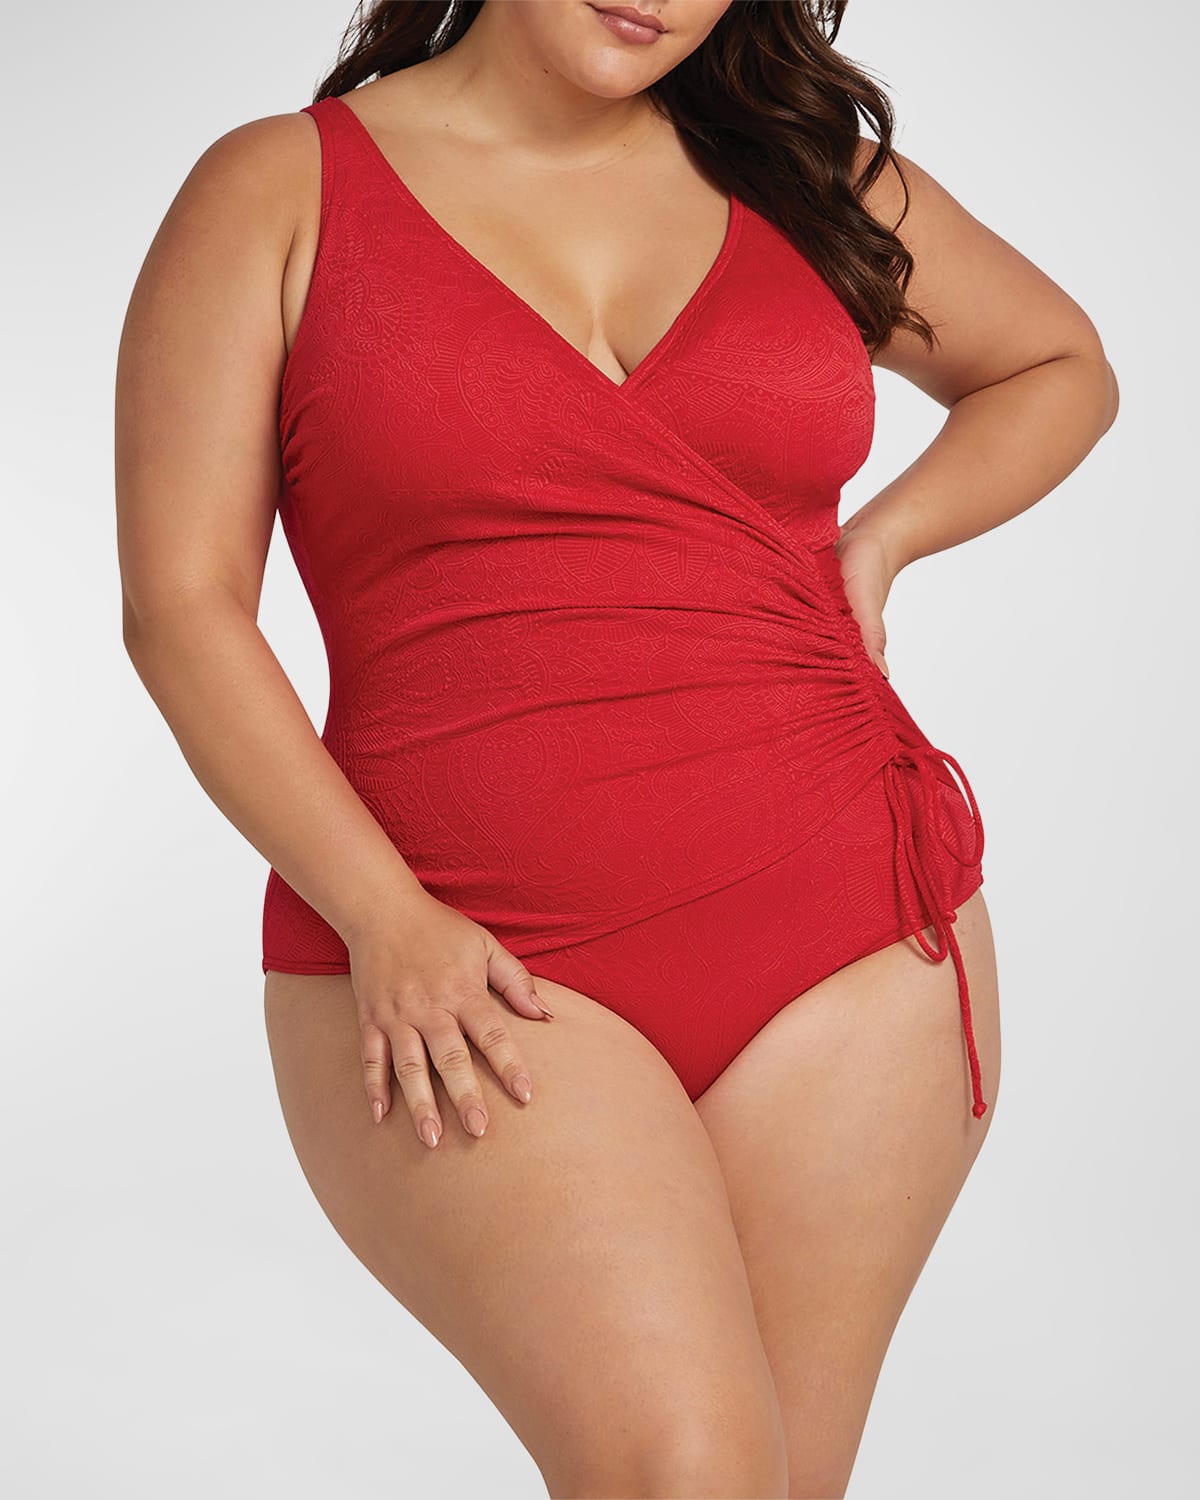 Artesands Rembrant One-piece Swimsuit In Crimson Red